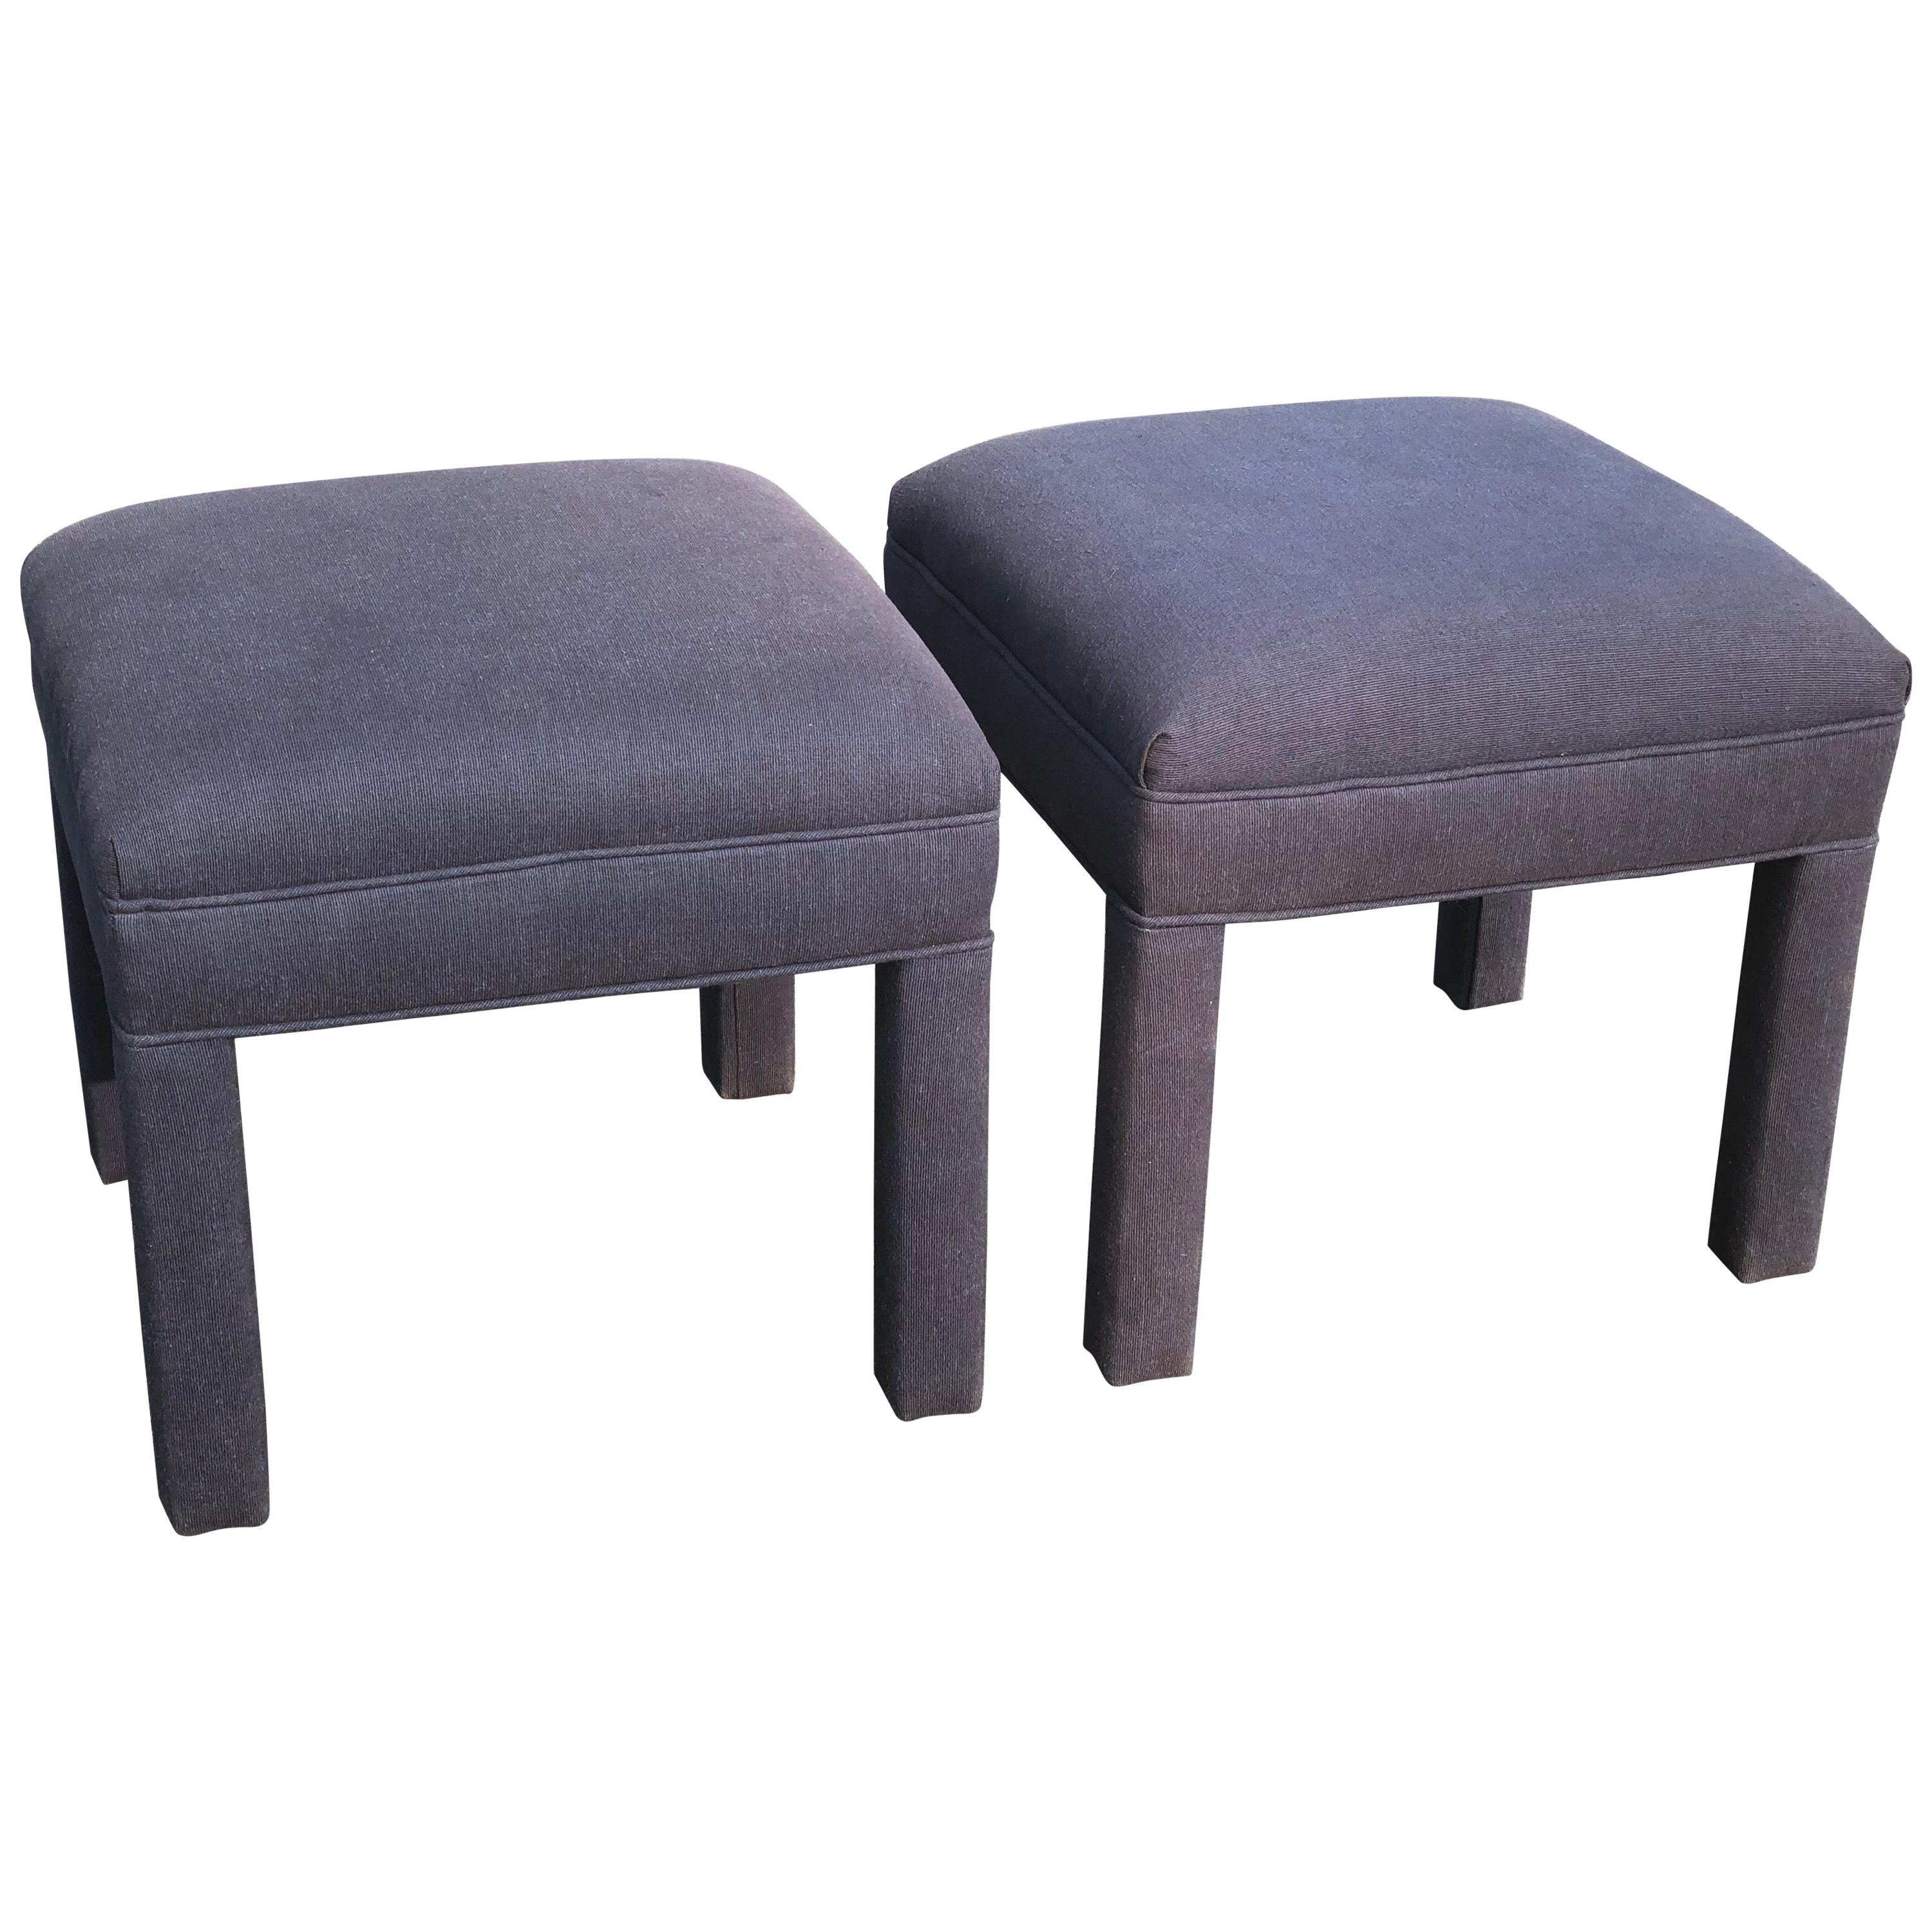 Pair of Royal Blue Upholstered Ottomans